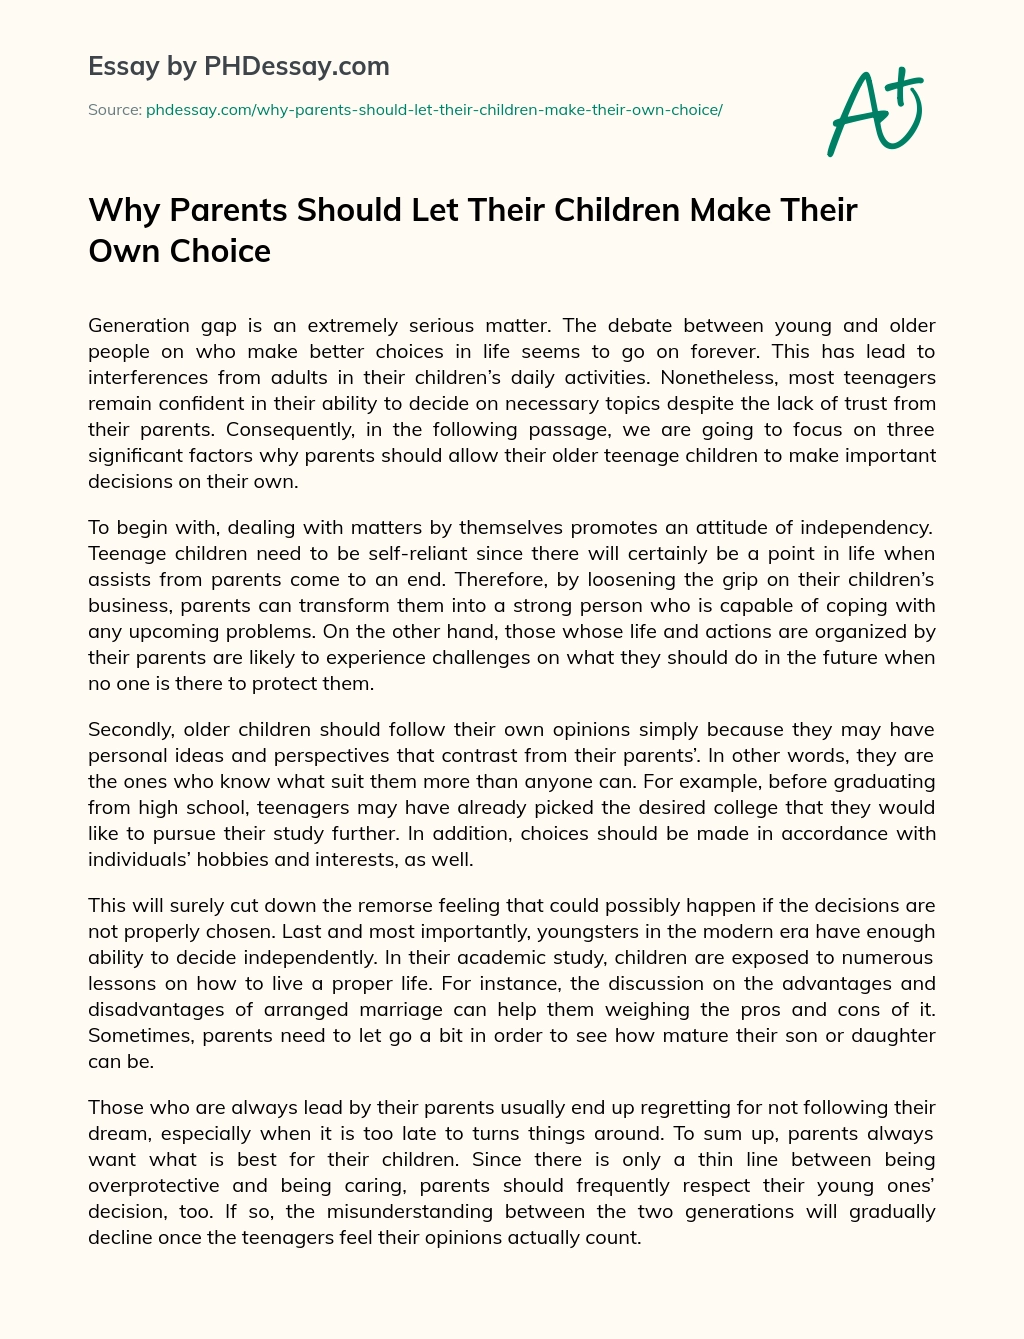 Why Parents Should Let Their Children Make Their Own Choice essay